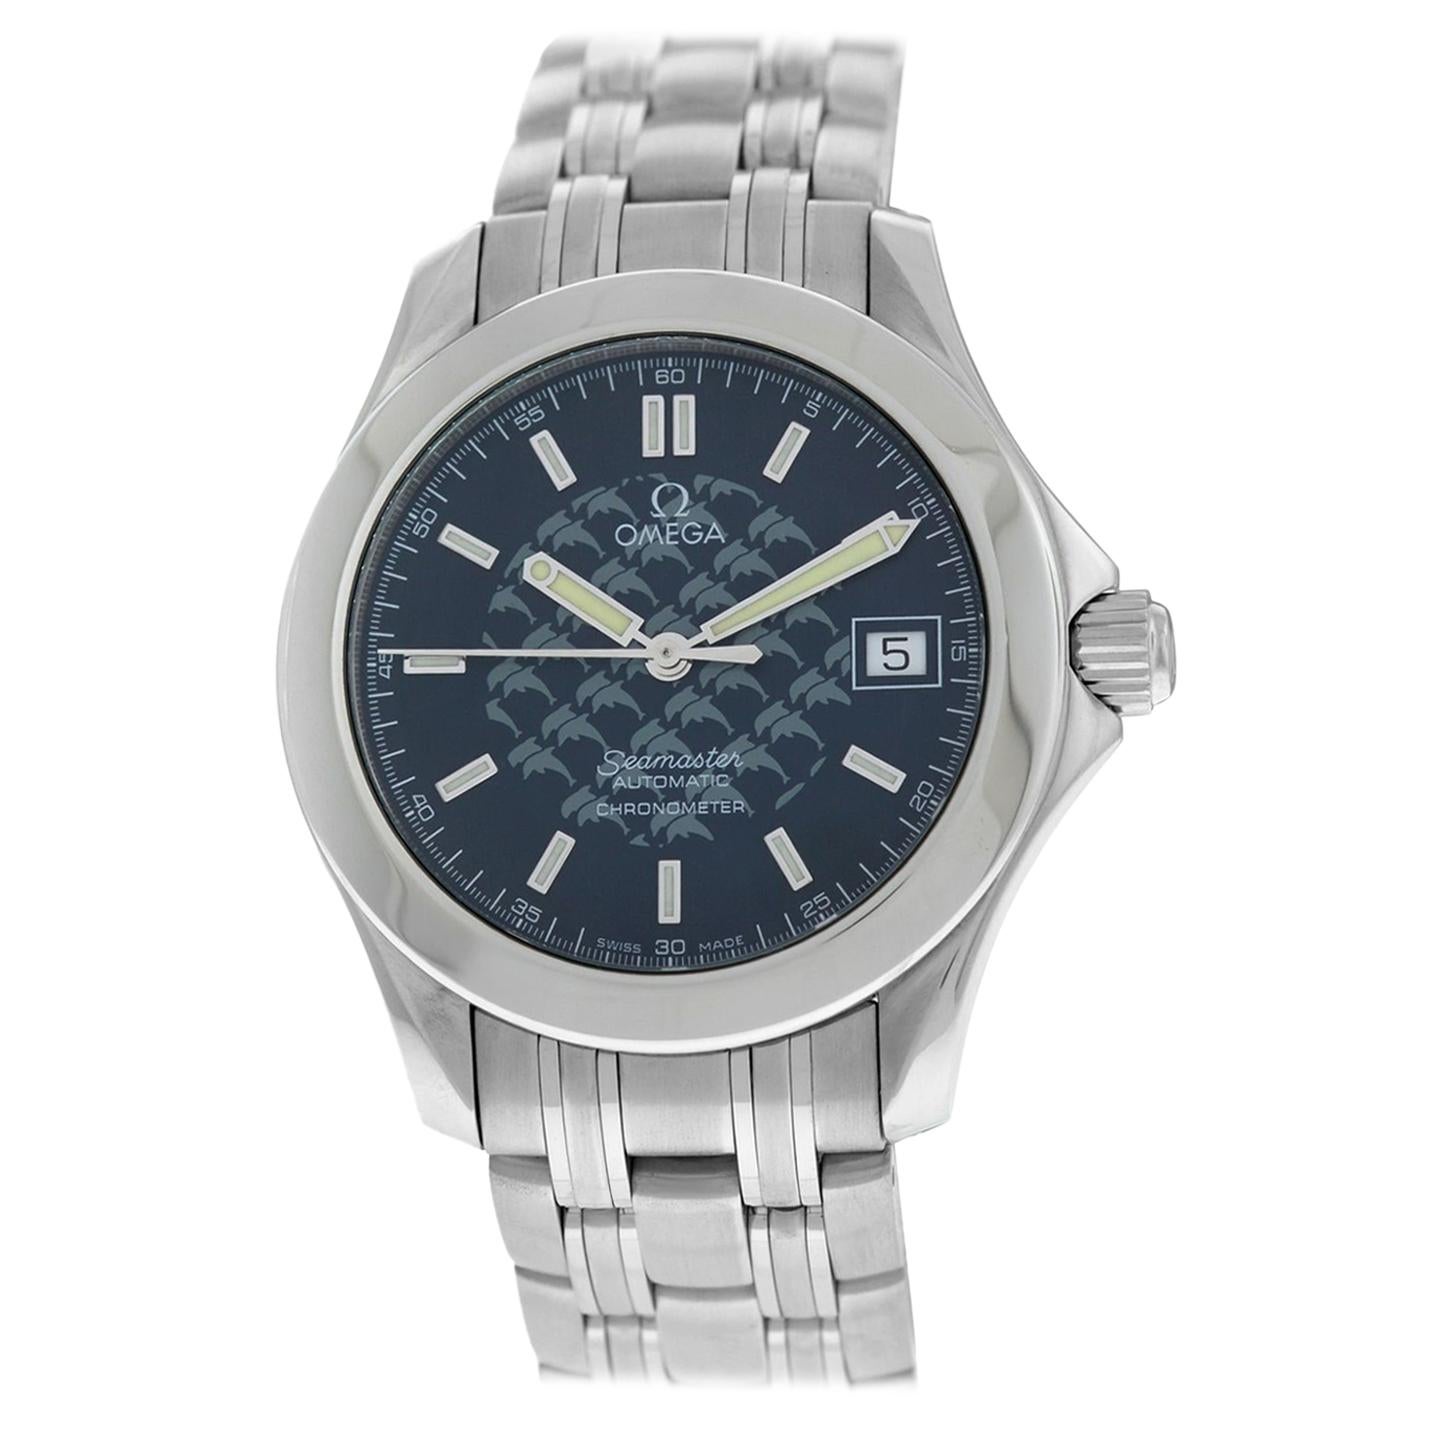 Omega Seamaster Jacques Mayol 2002 Limited Edition 2508.80 Chronometer Watch For Sale